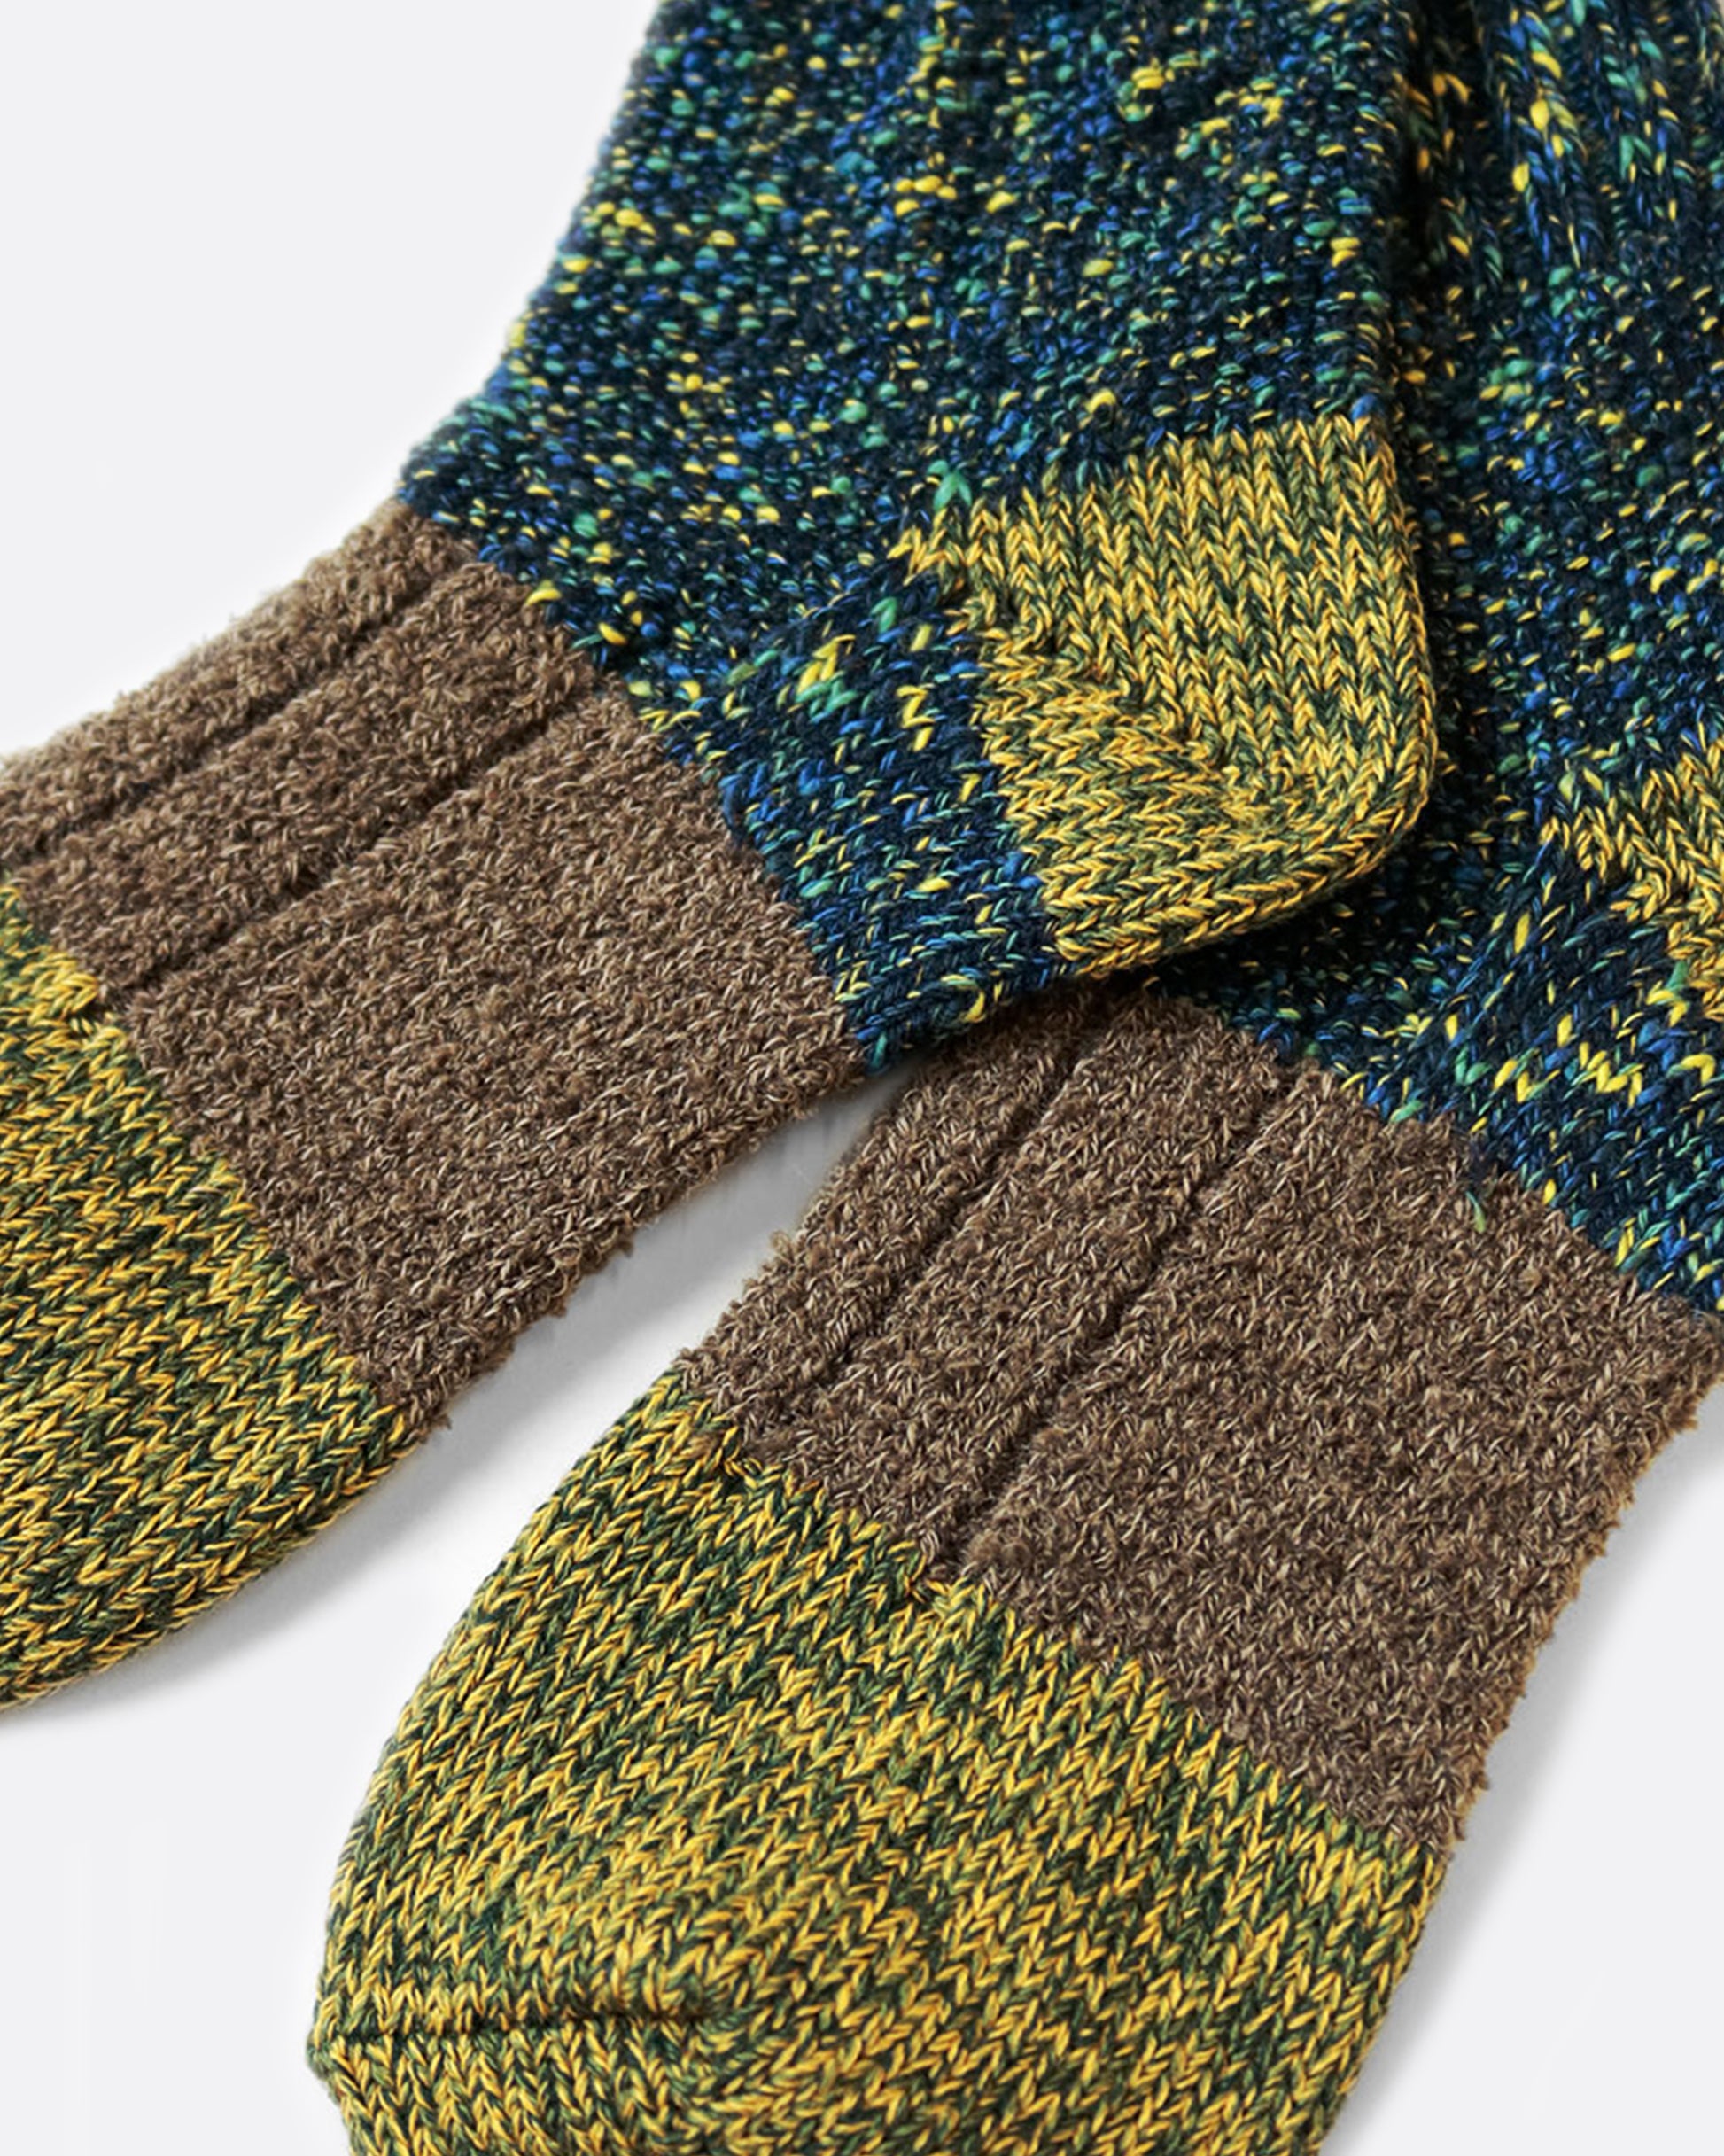 These socks combine three different textures to create a pair with just the right amount of hold and stretch.